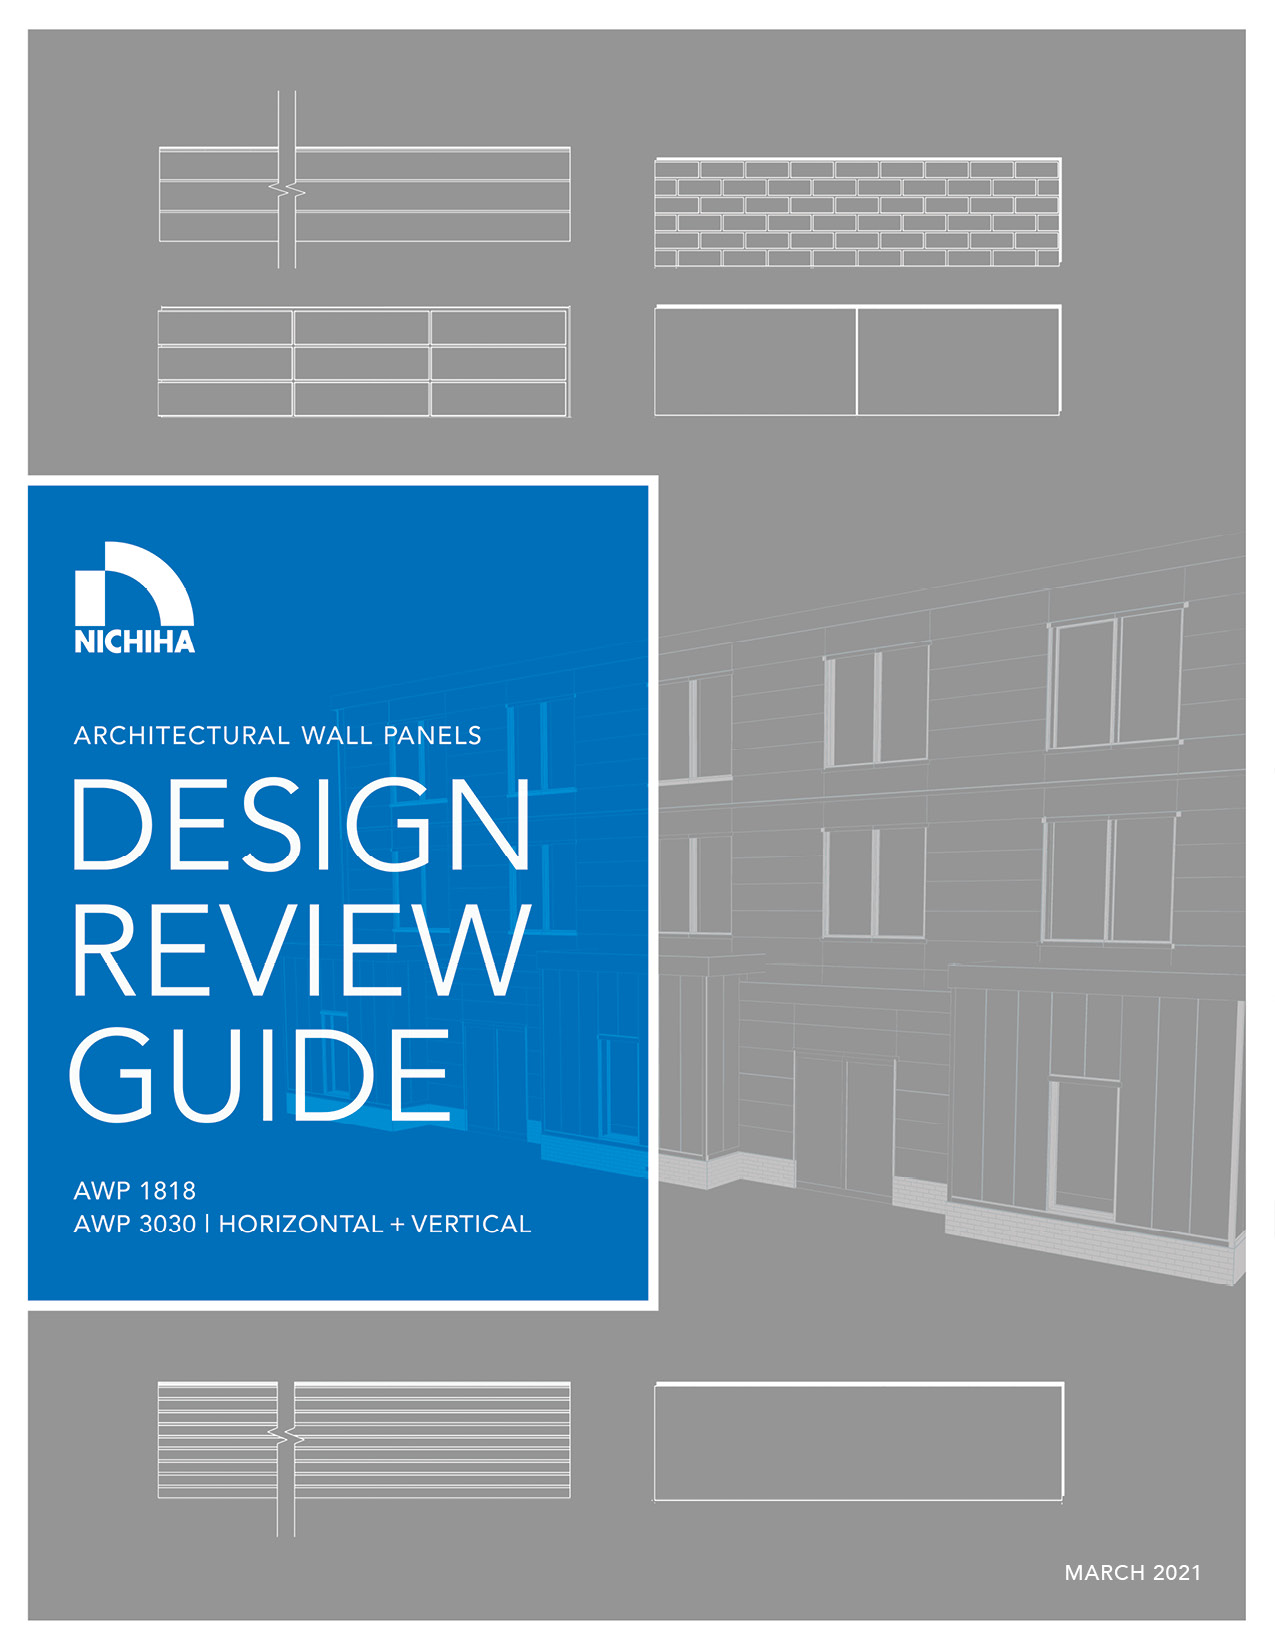 Cover of the Nichiha Design Review Guide